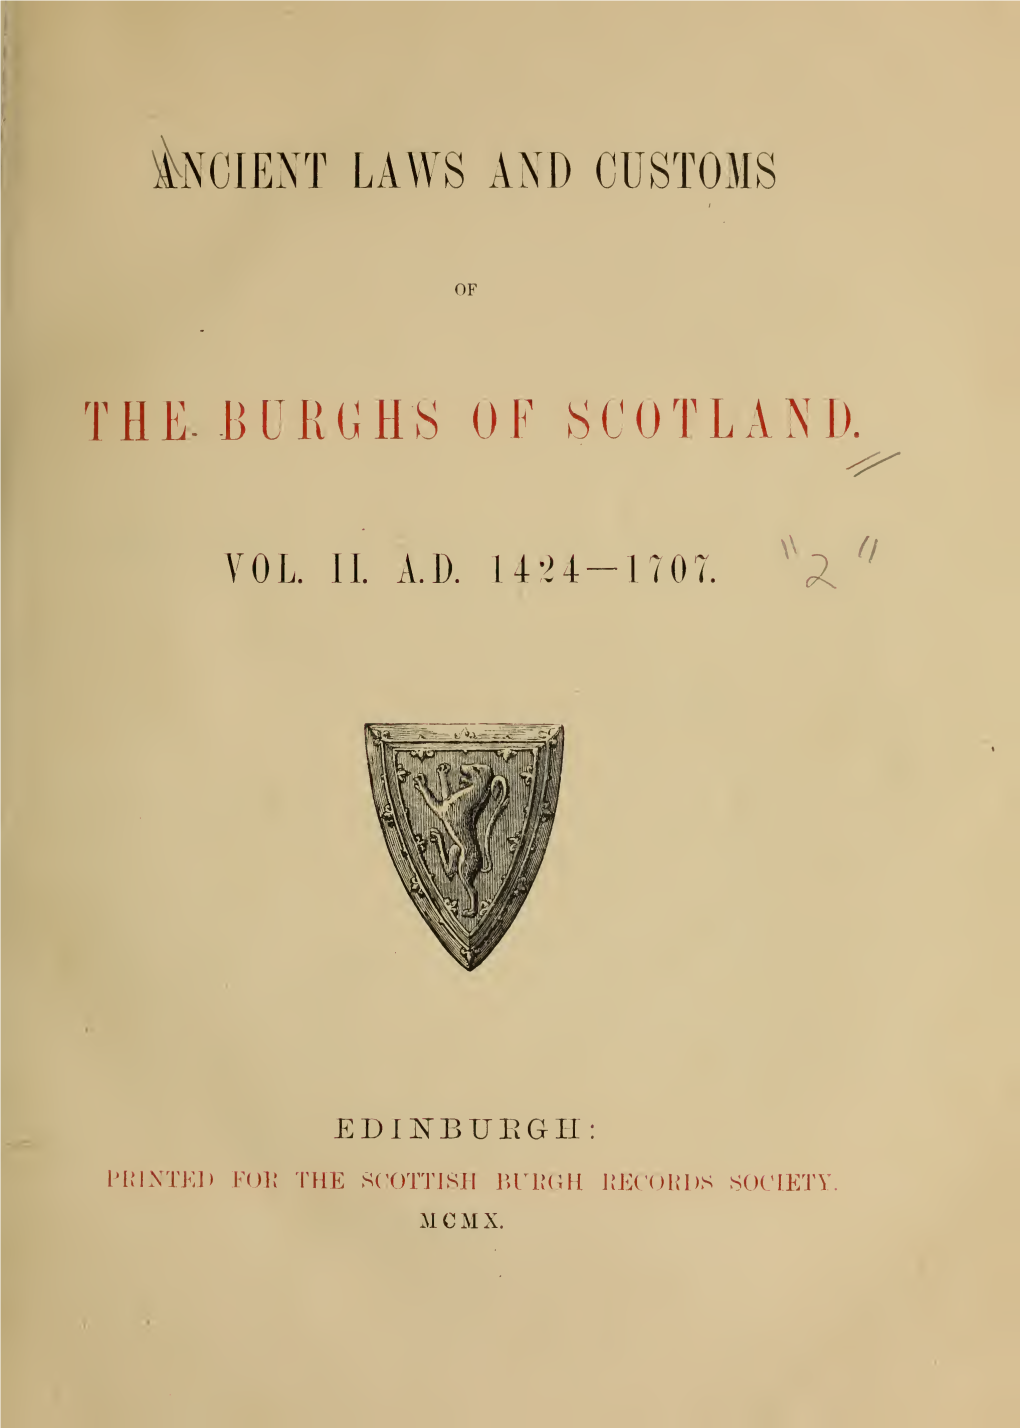 Ancient Laws and Customs of the Burghs of Scotland, Vol